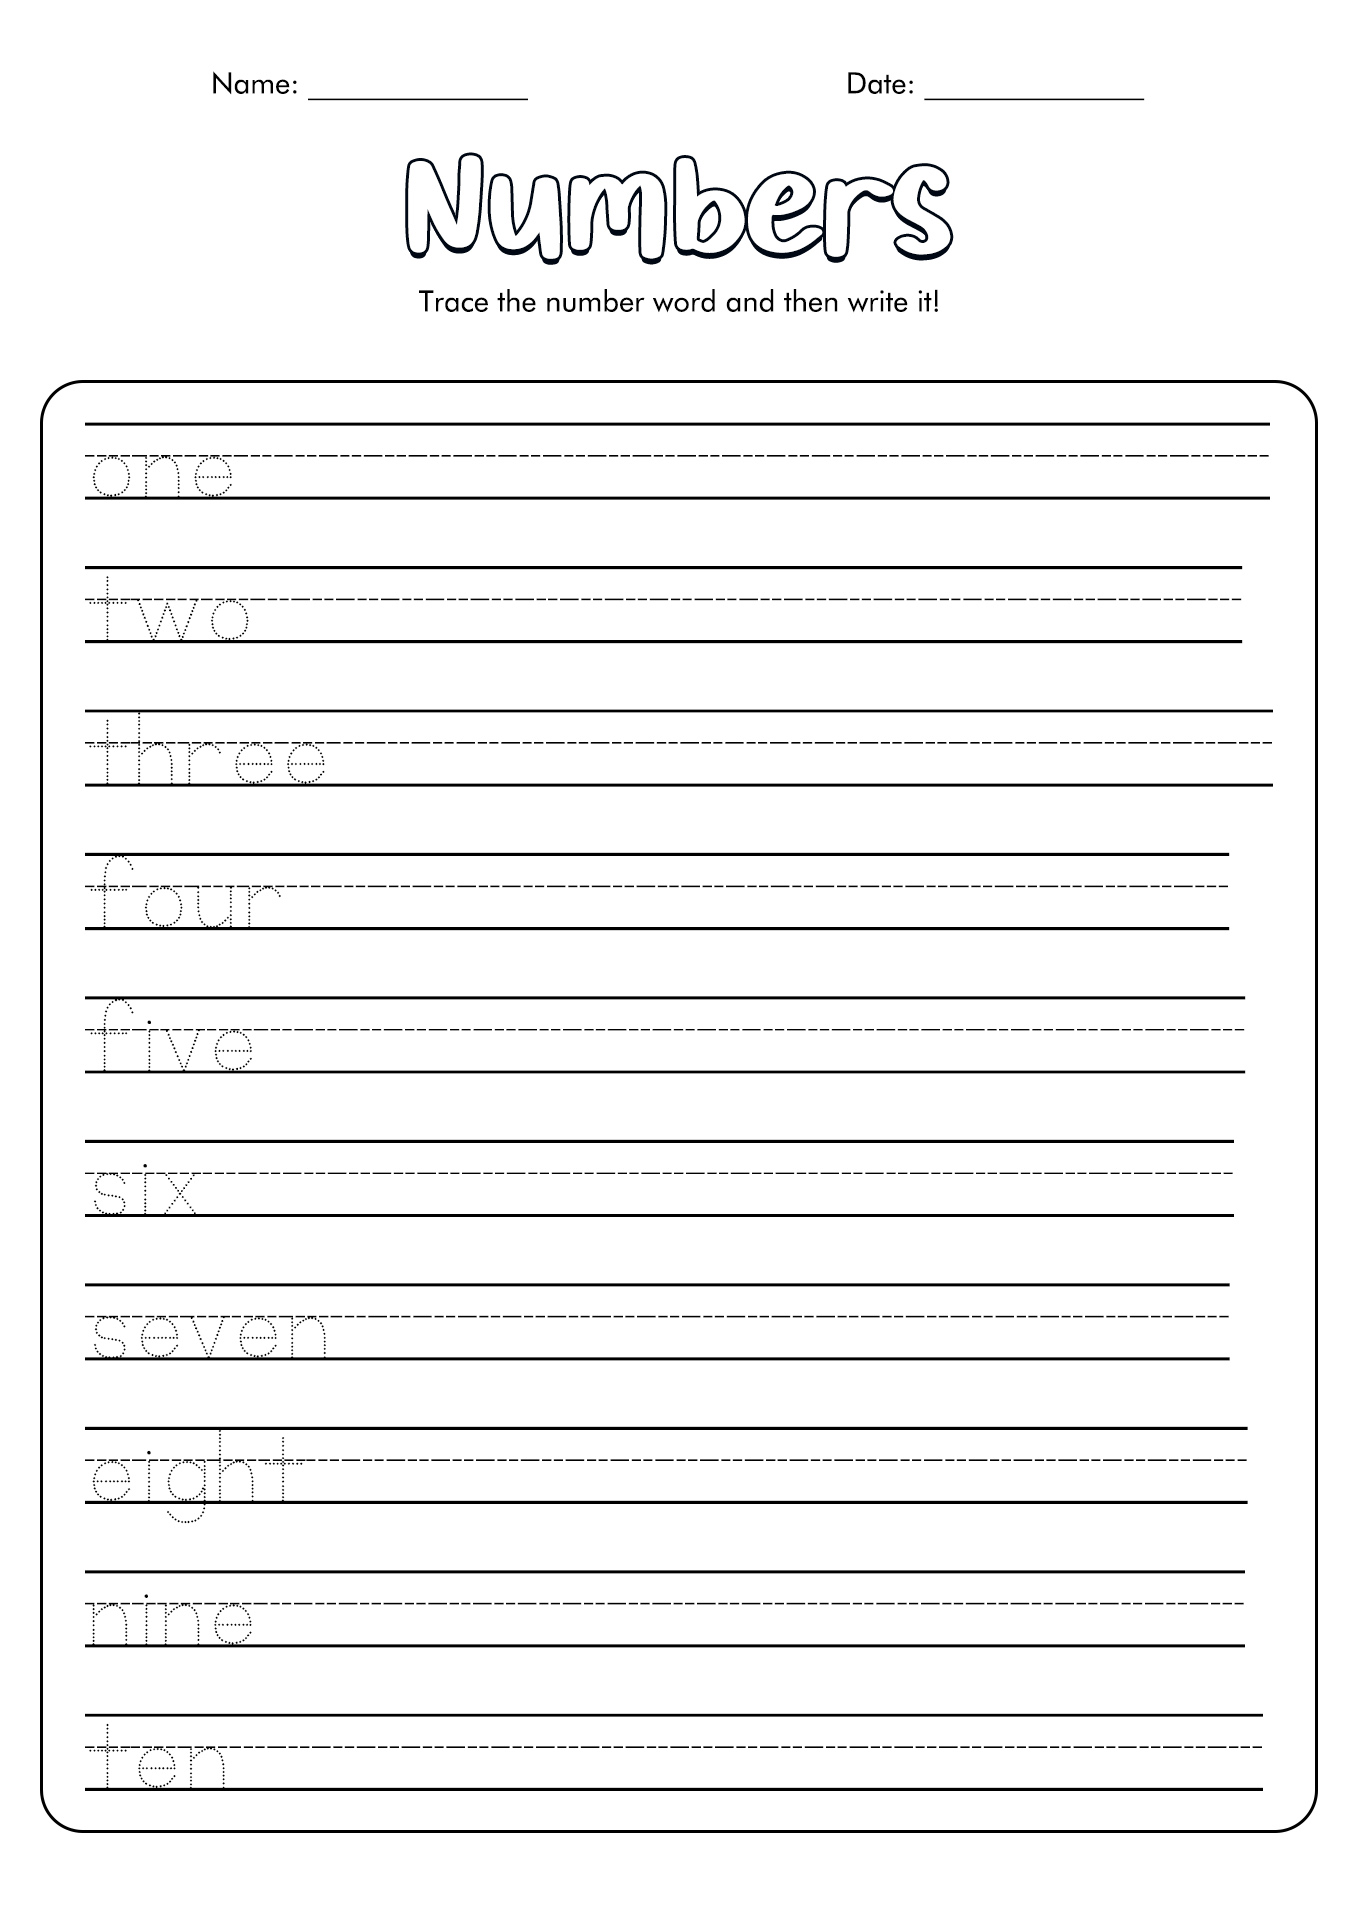 14 Best Images of Practice Writing Words Worksheets